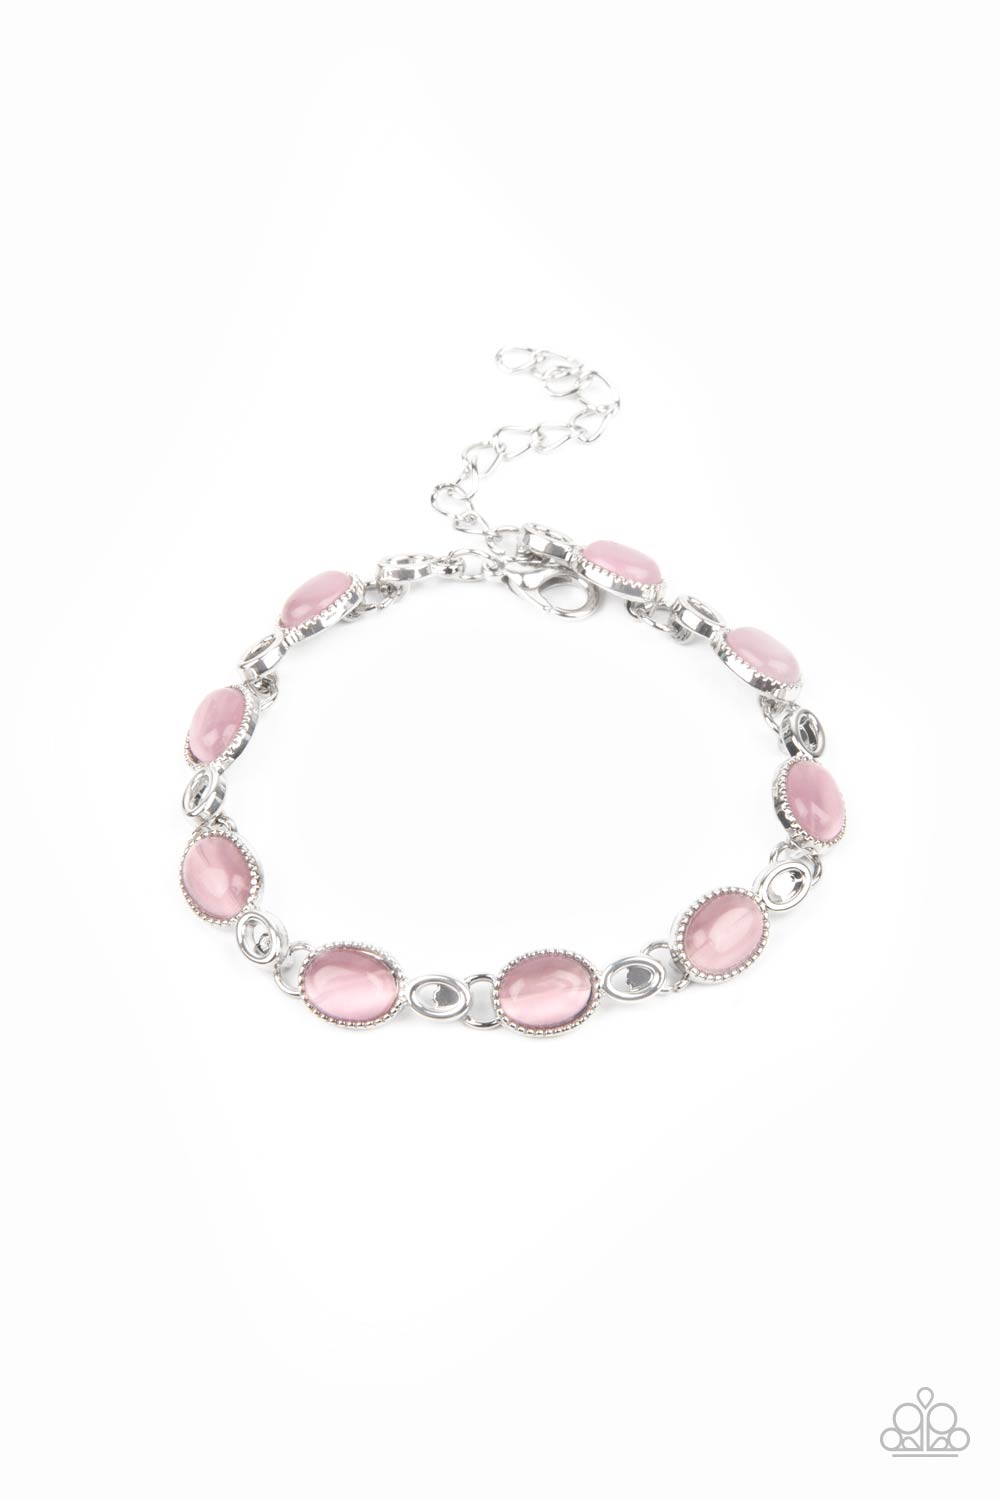 five-dollar-jewelry-blissfully-beaming-pink-bracelet-paparazzi-accessories